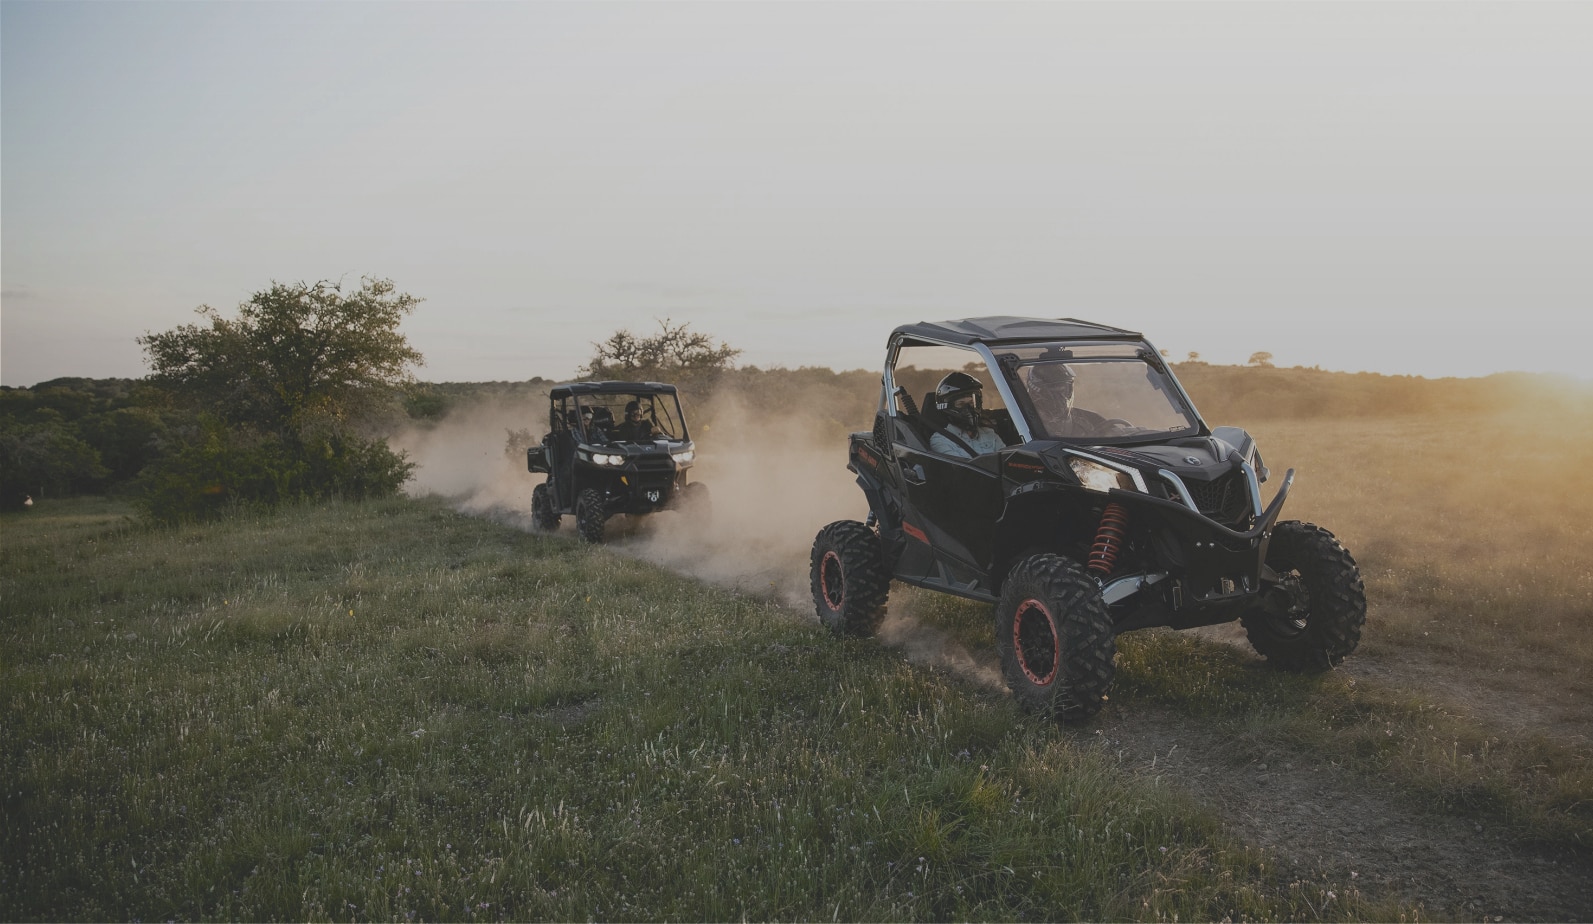 two Can-Am off-road vehicles